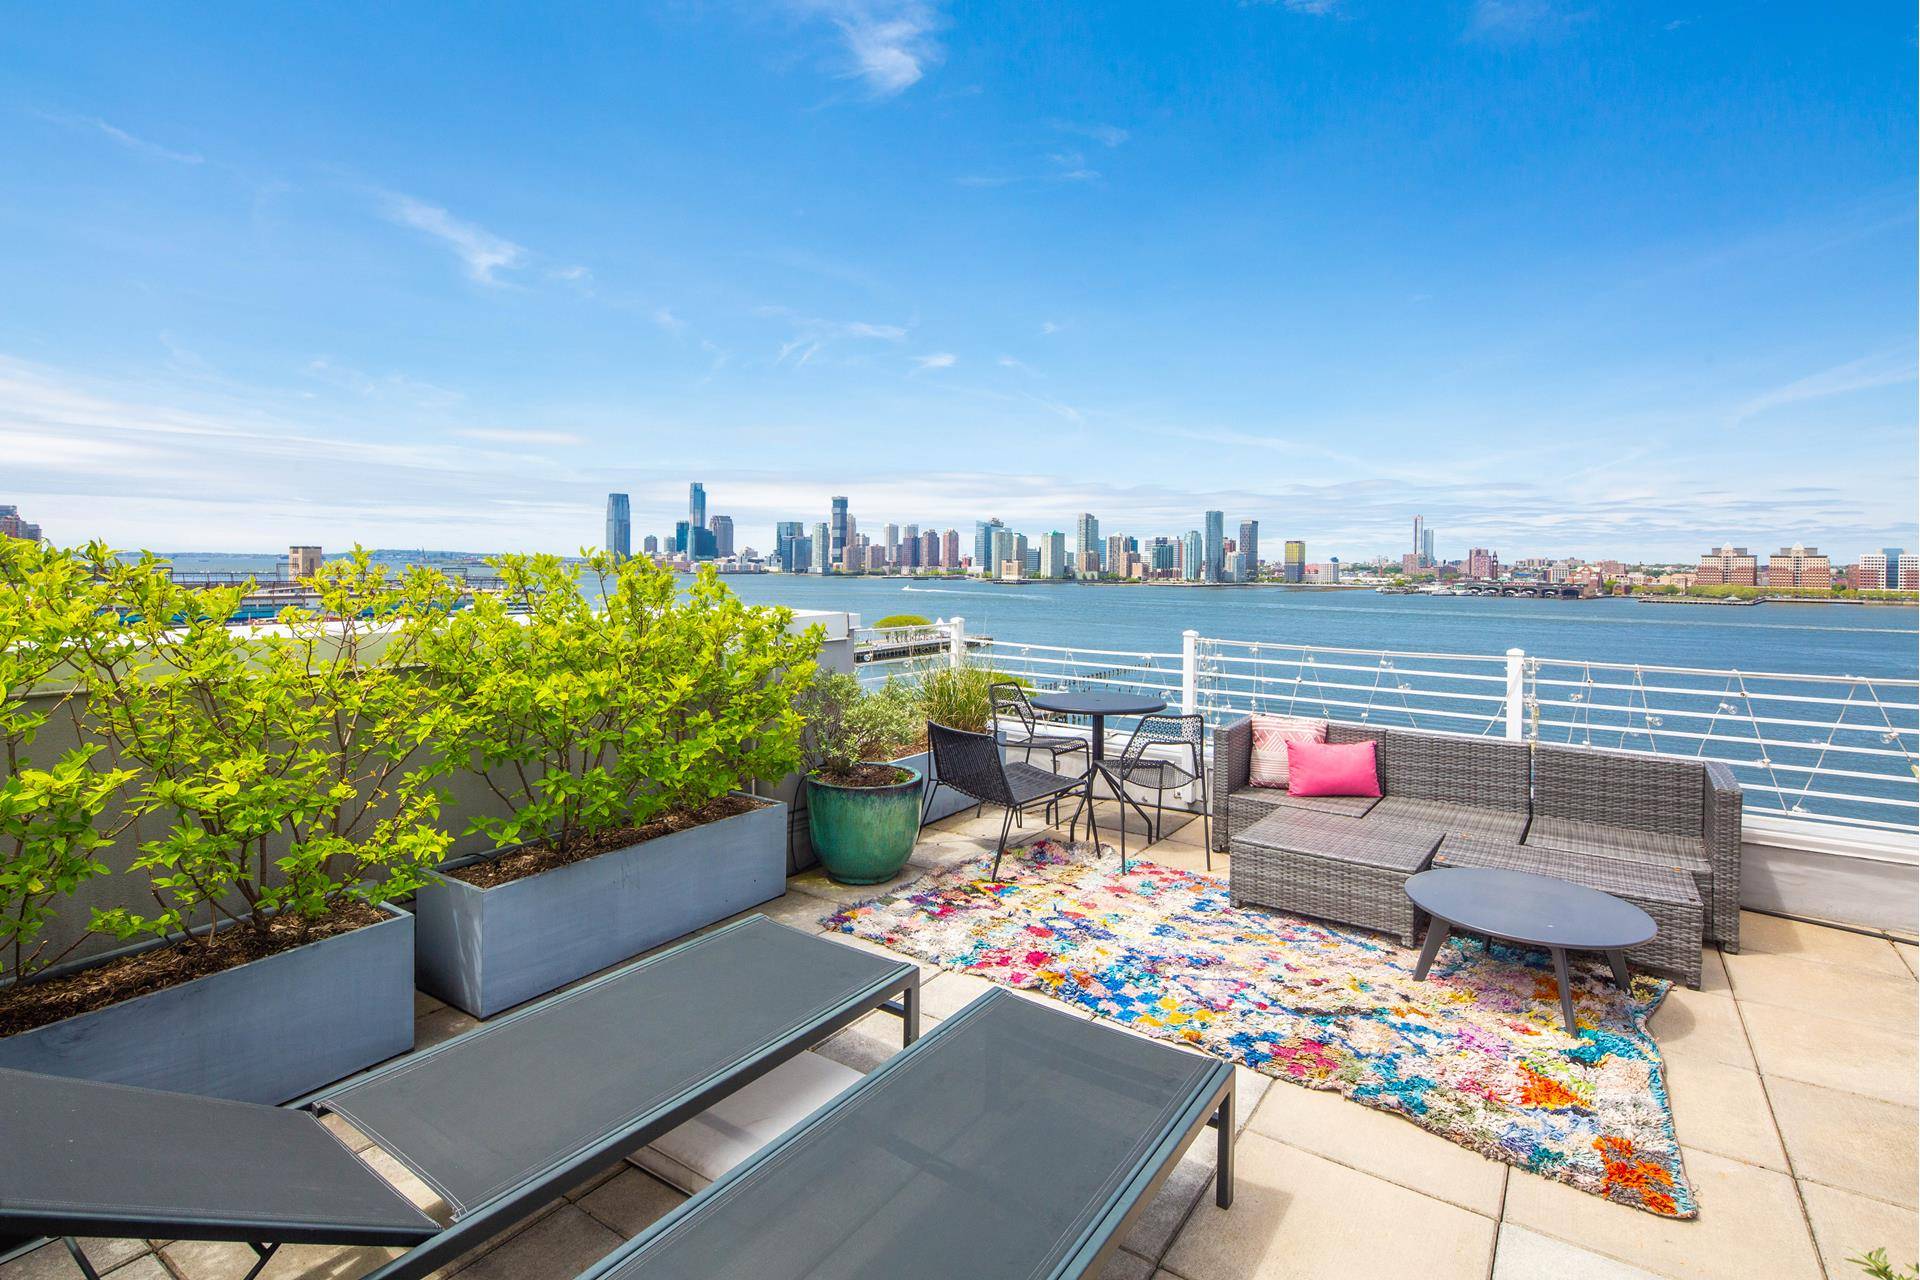 The top SKY PENTHOUSE residence at FOUR23, the West Village's newest coterie of chic loft homes overlooking the Hudson River Park.